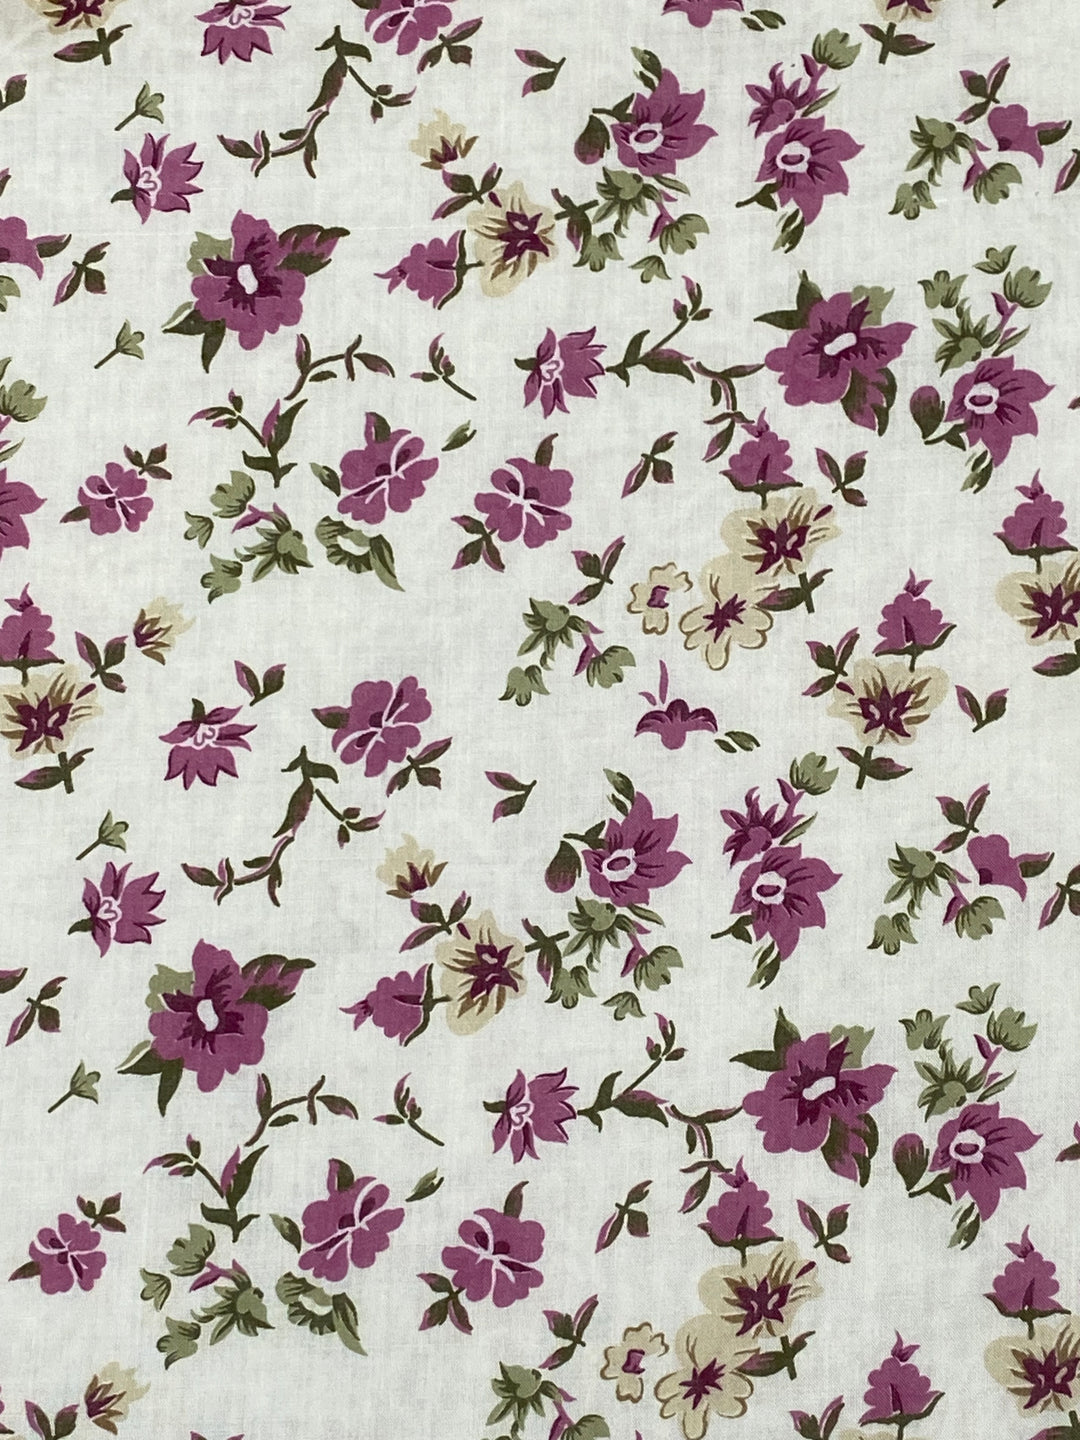 Printed Floral Cotton Fabric White/Pink